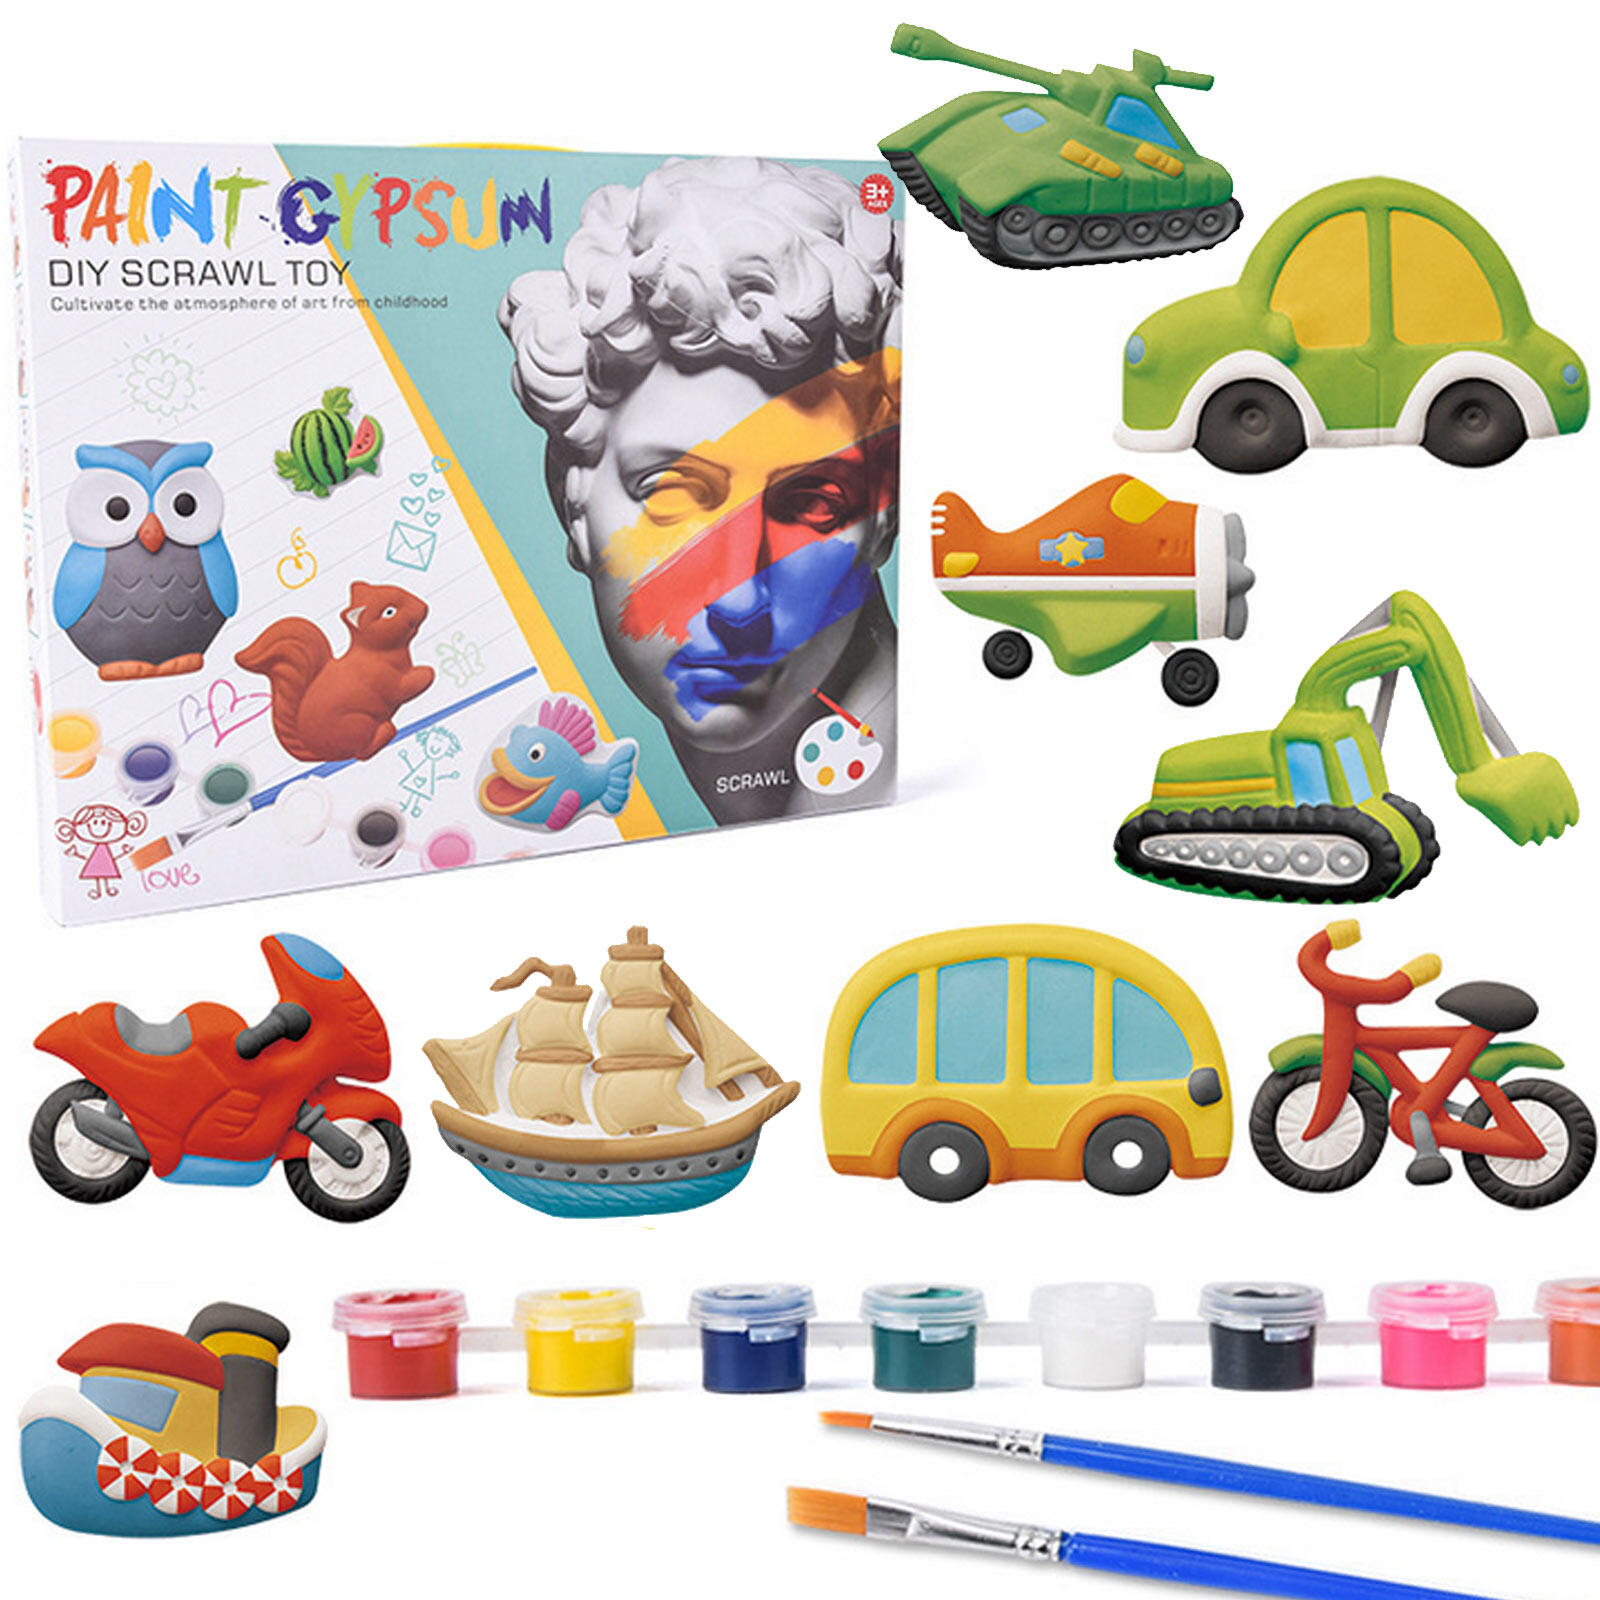 Kids Plaster Painting Kit DIY Paint Your Own Figurines Crafts Arts Toy Set  for Boys Girls Birthday Christmas Gift